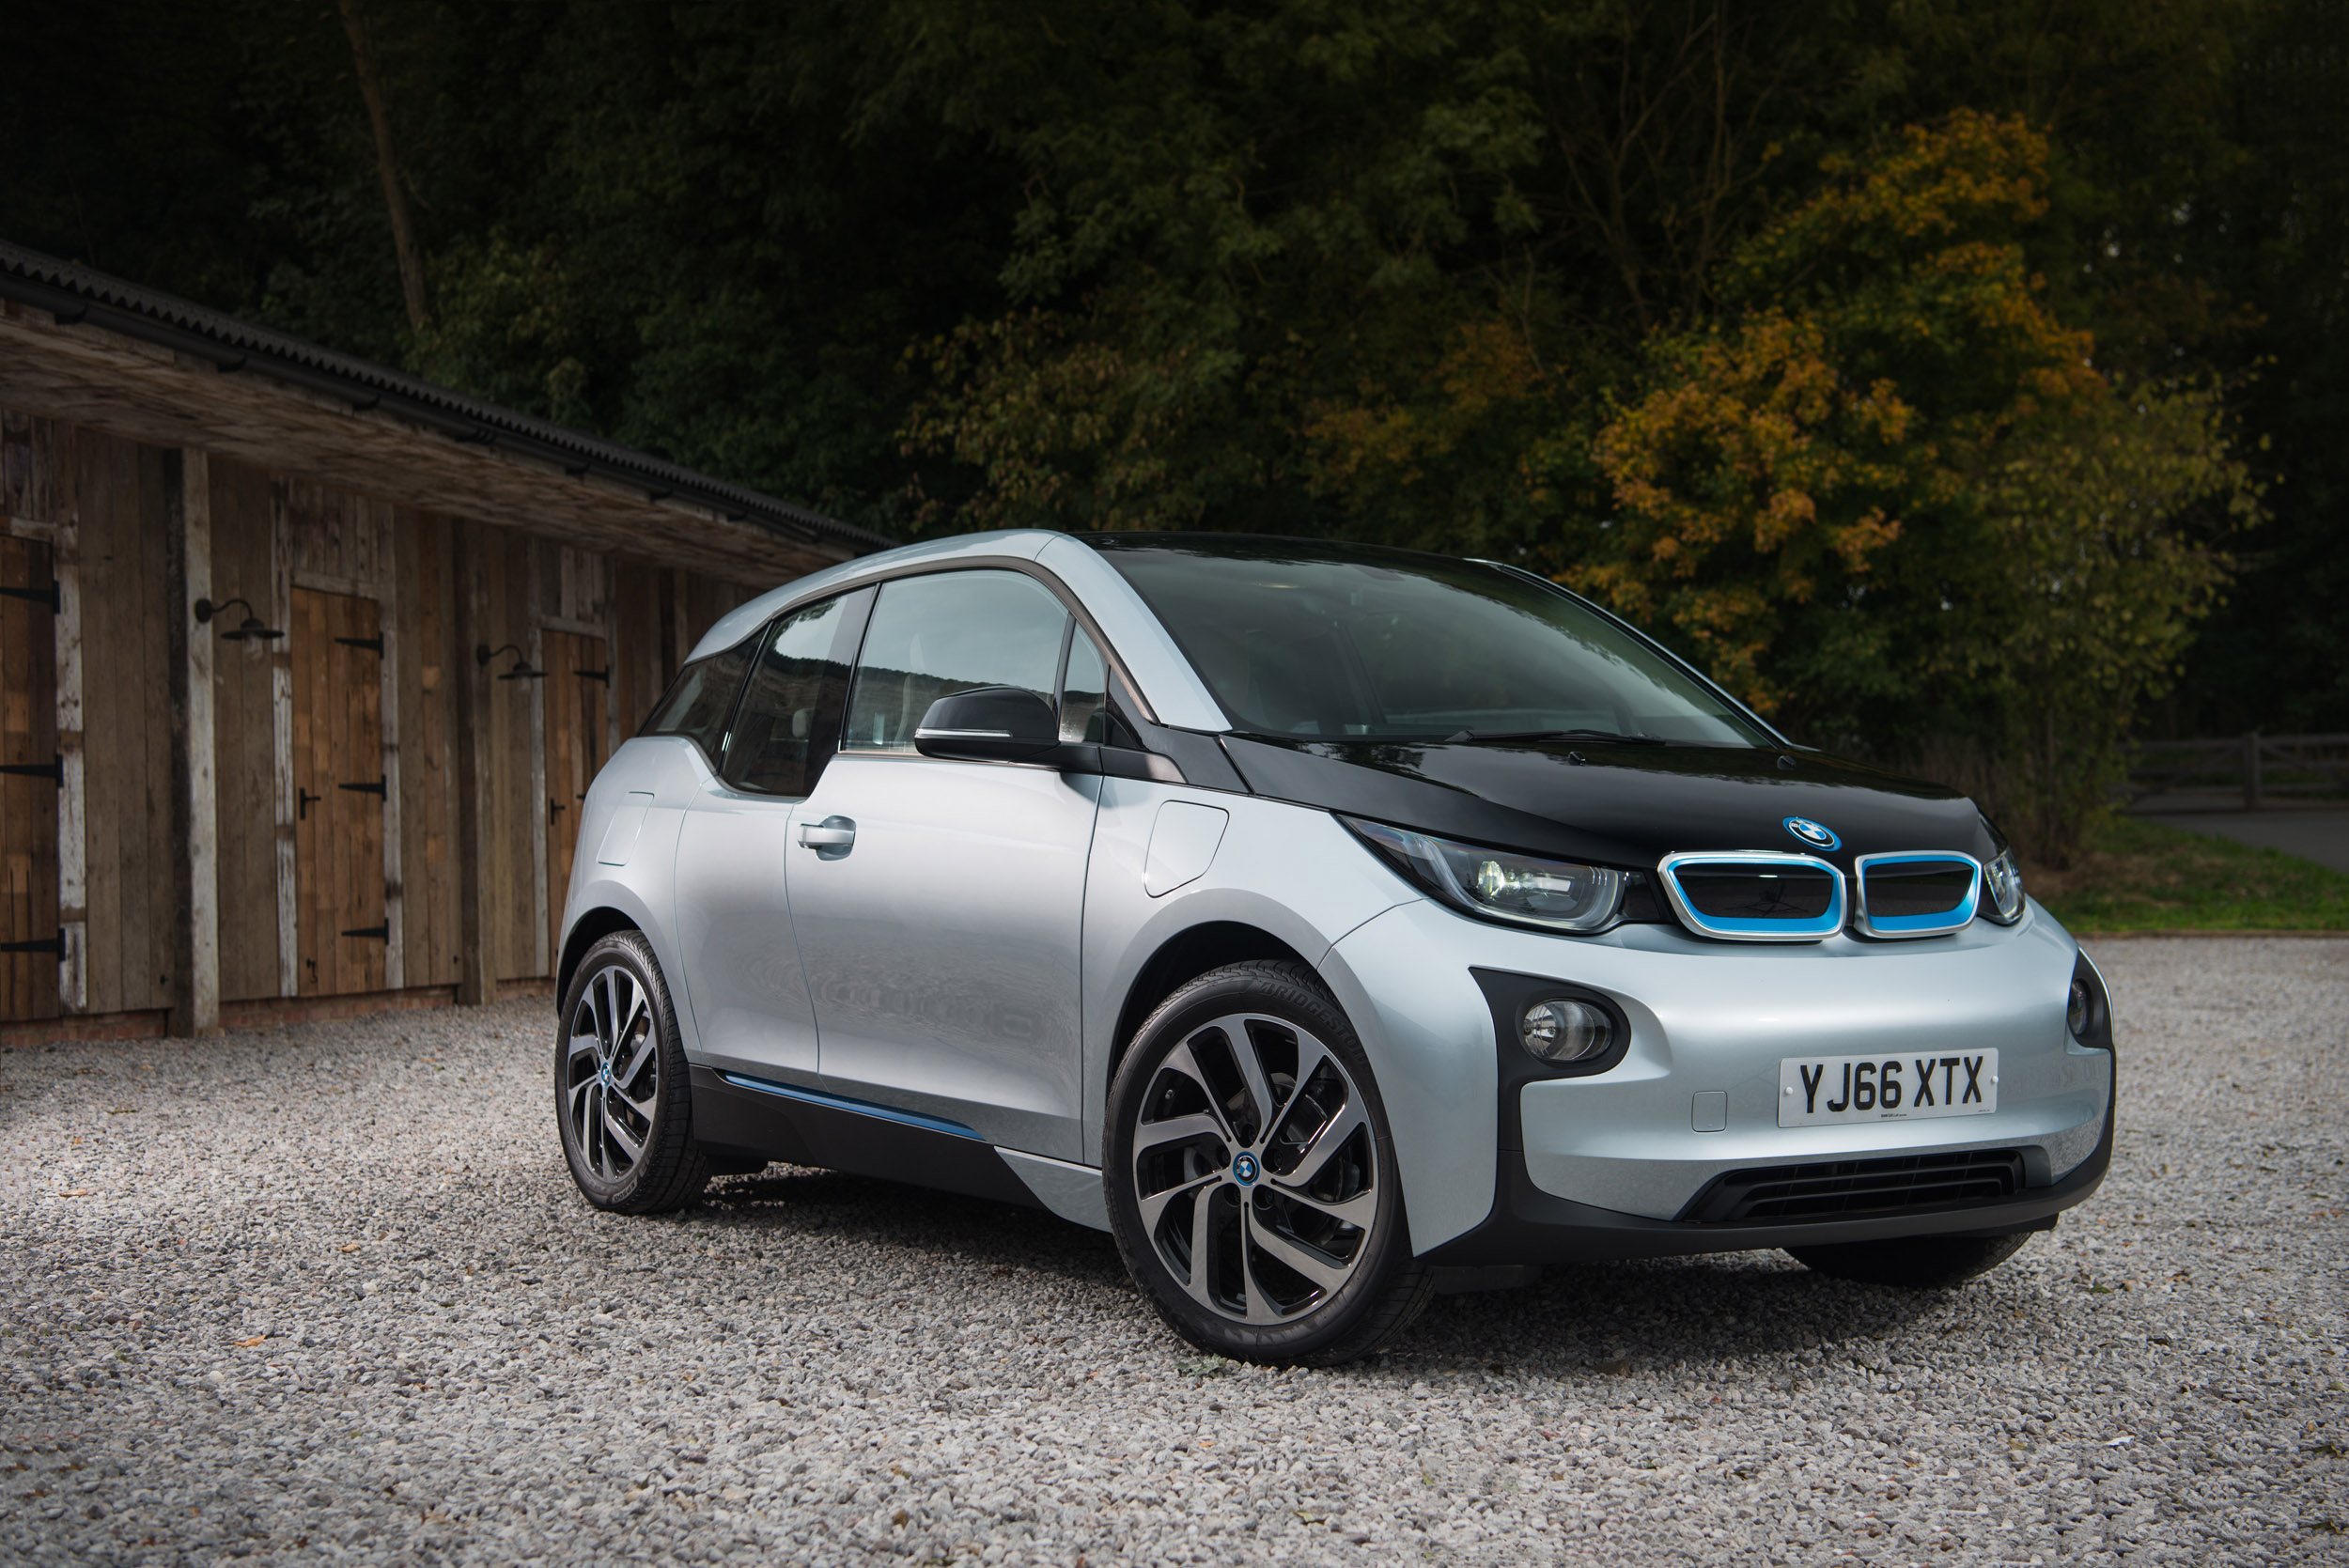 How Fast is the BMW i3?